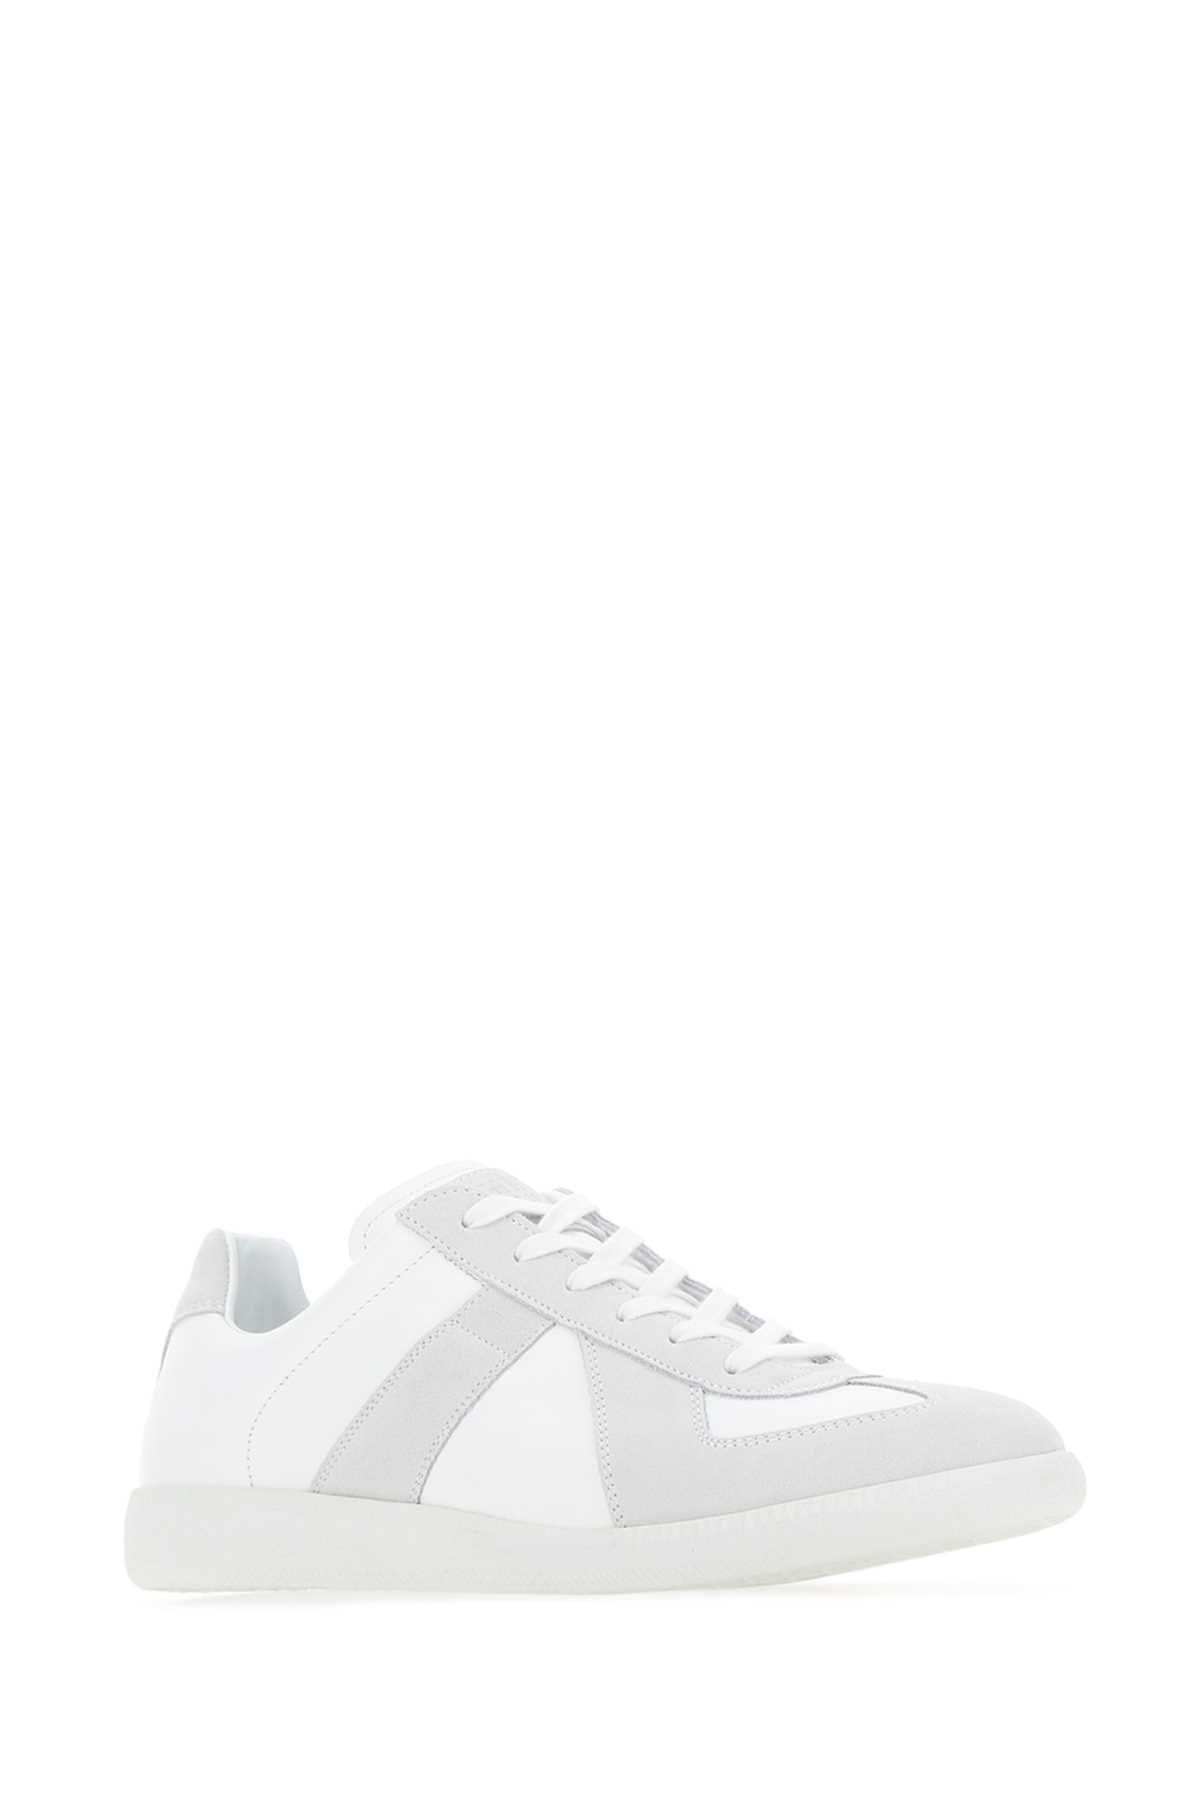 MAISON MARGIELA TWO-TONE LEATHER AND SUEDE REPLICA SNEAKERS